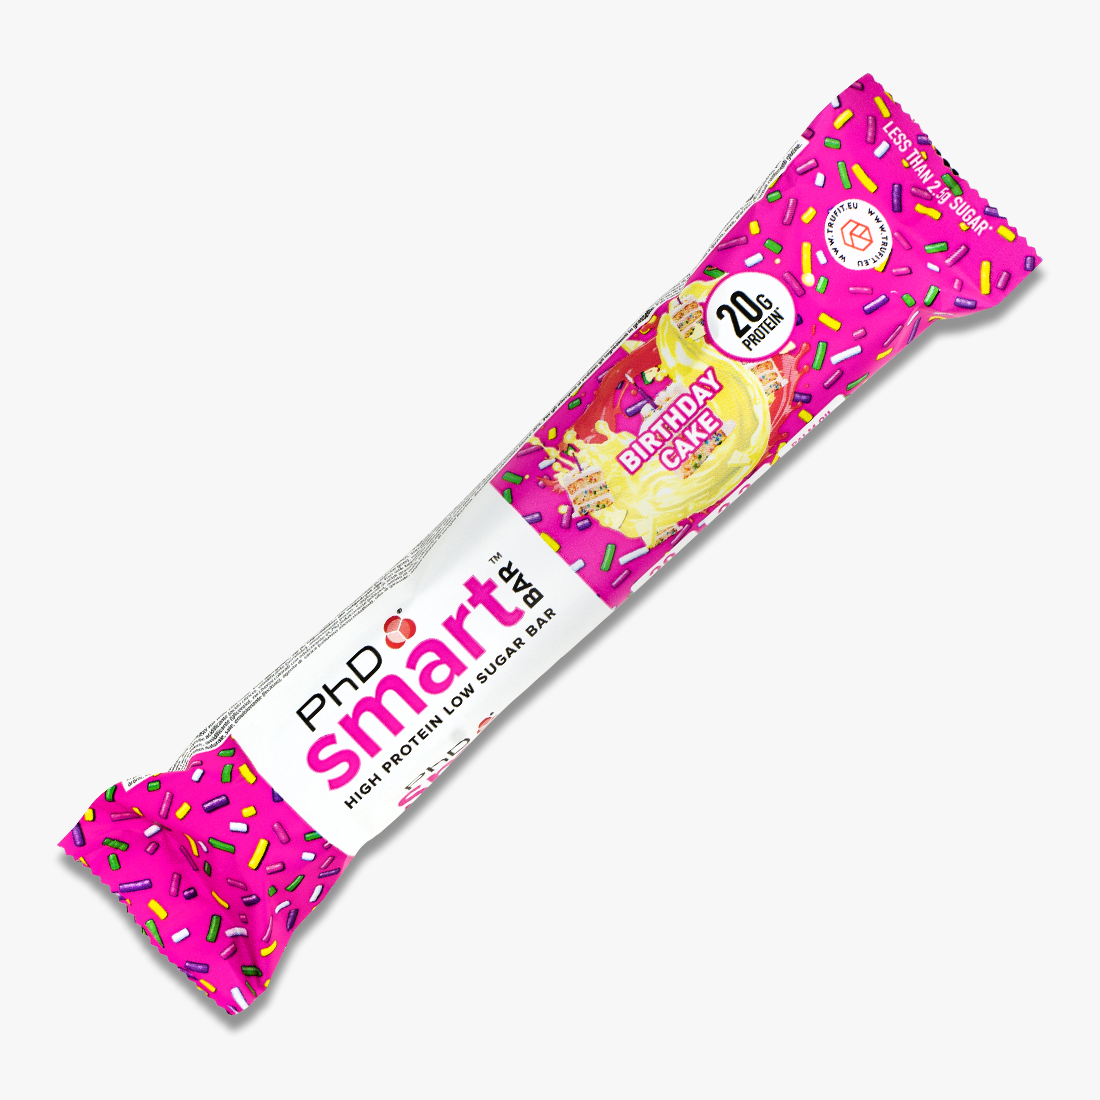 Quest Has Released Birthday Cake Protein Bars